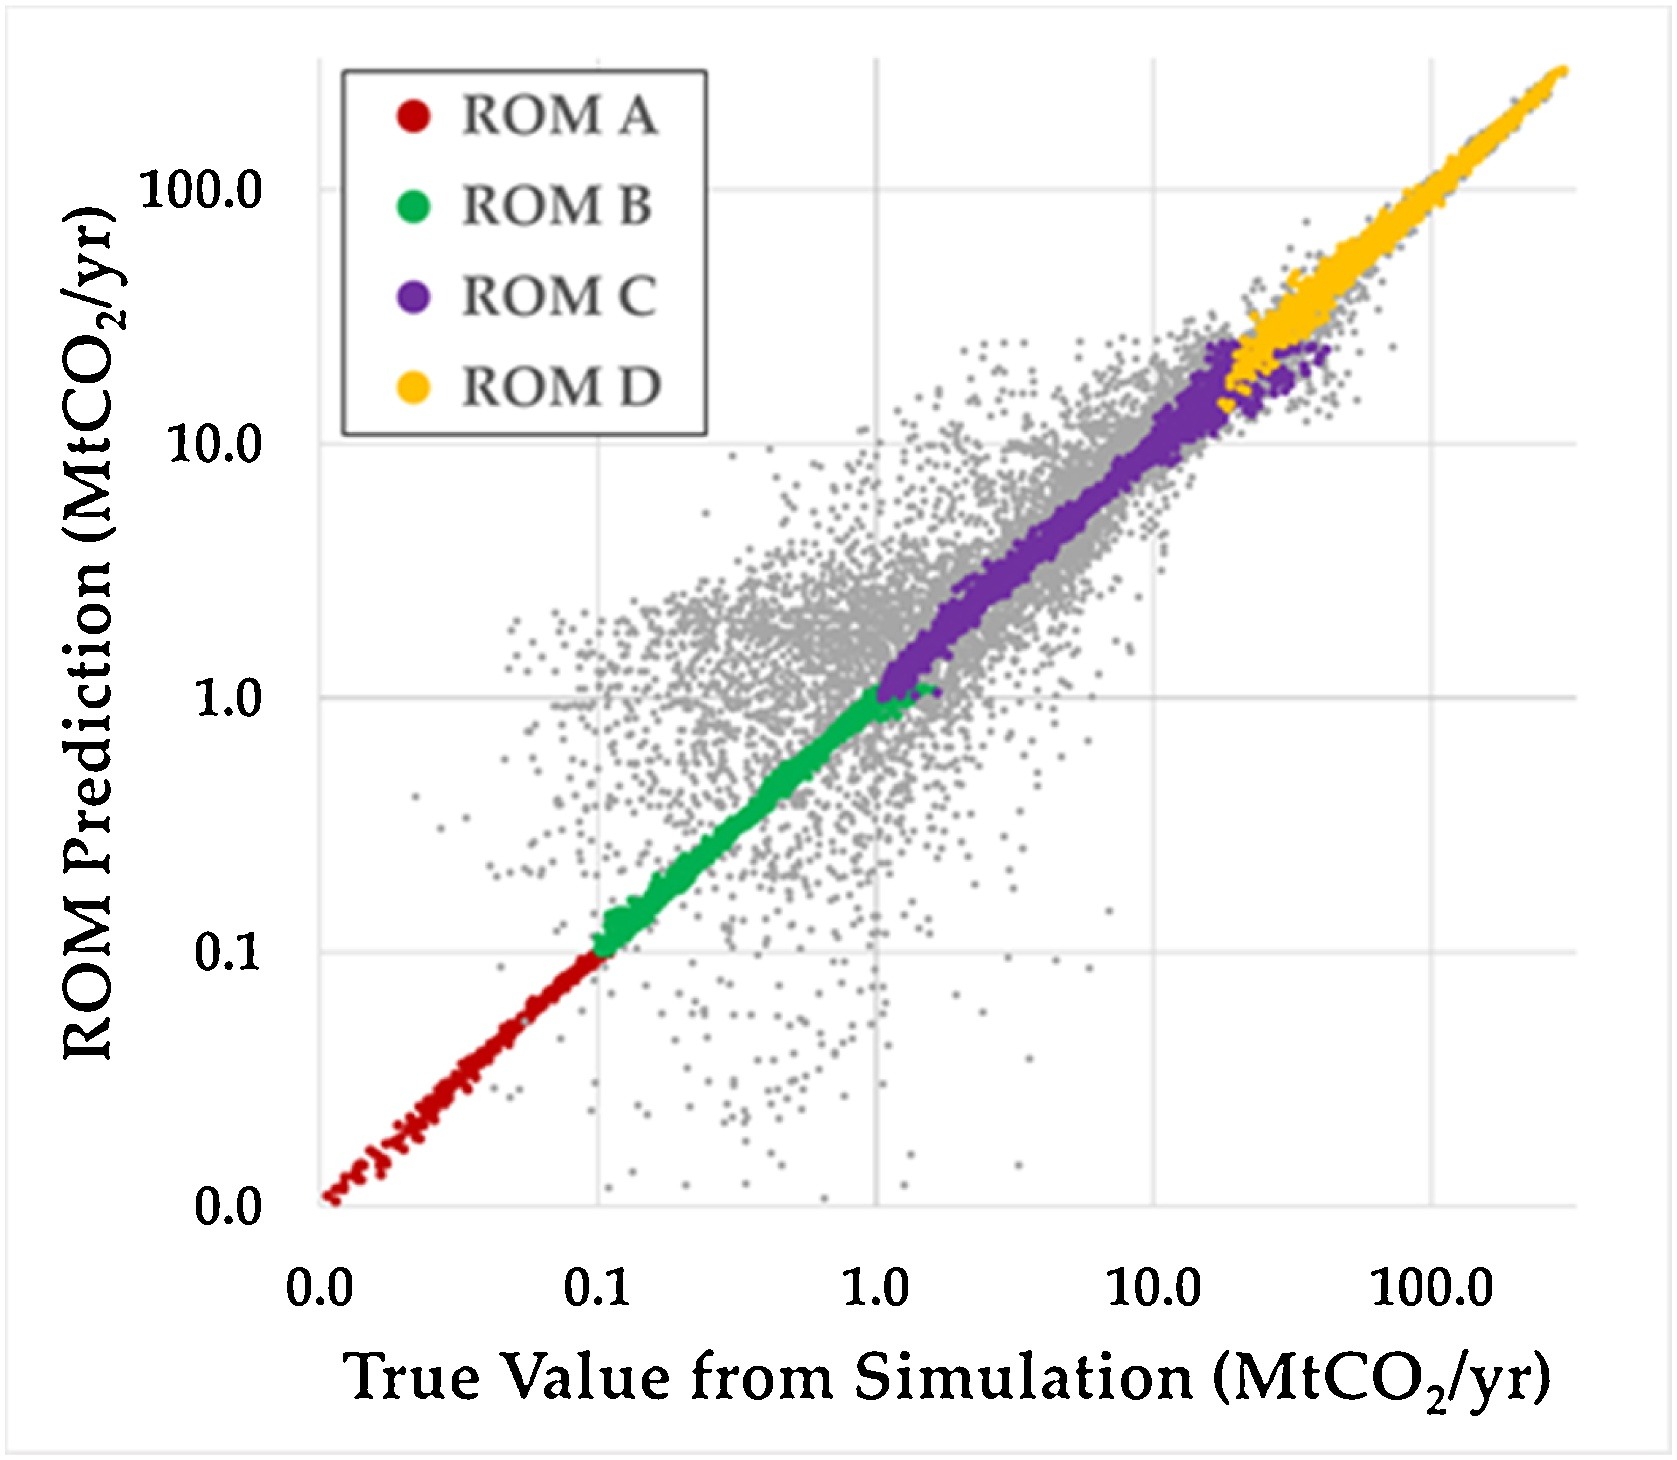 The performance of combining sub-ROMs (ROMs A, B, C, and D) generated from ROMster framework. The gray points correspond to the performance of ROM generated from traditional approach (e.g., single ROM approach).